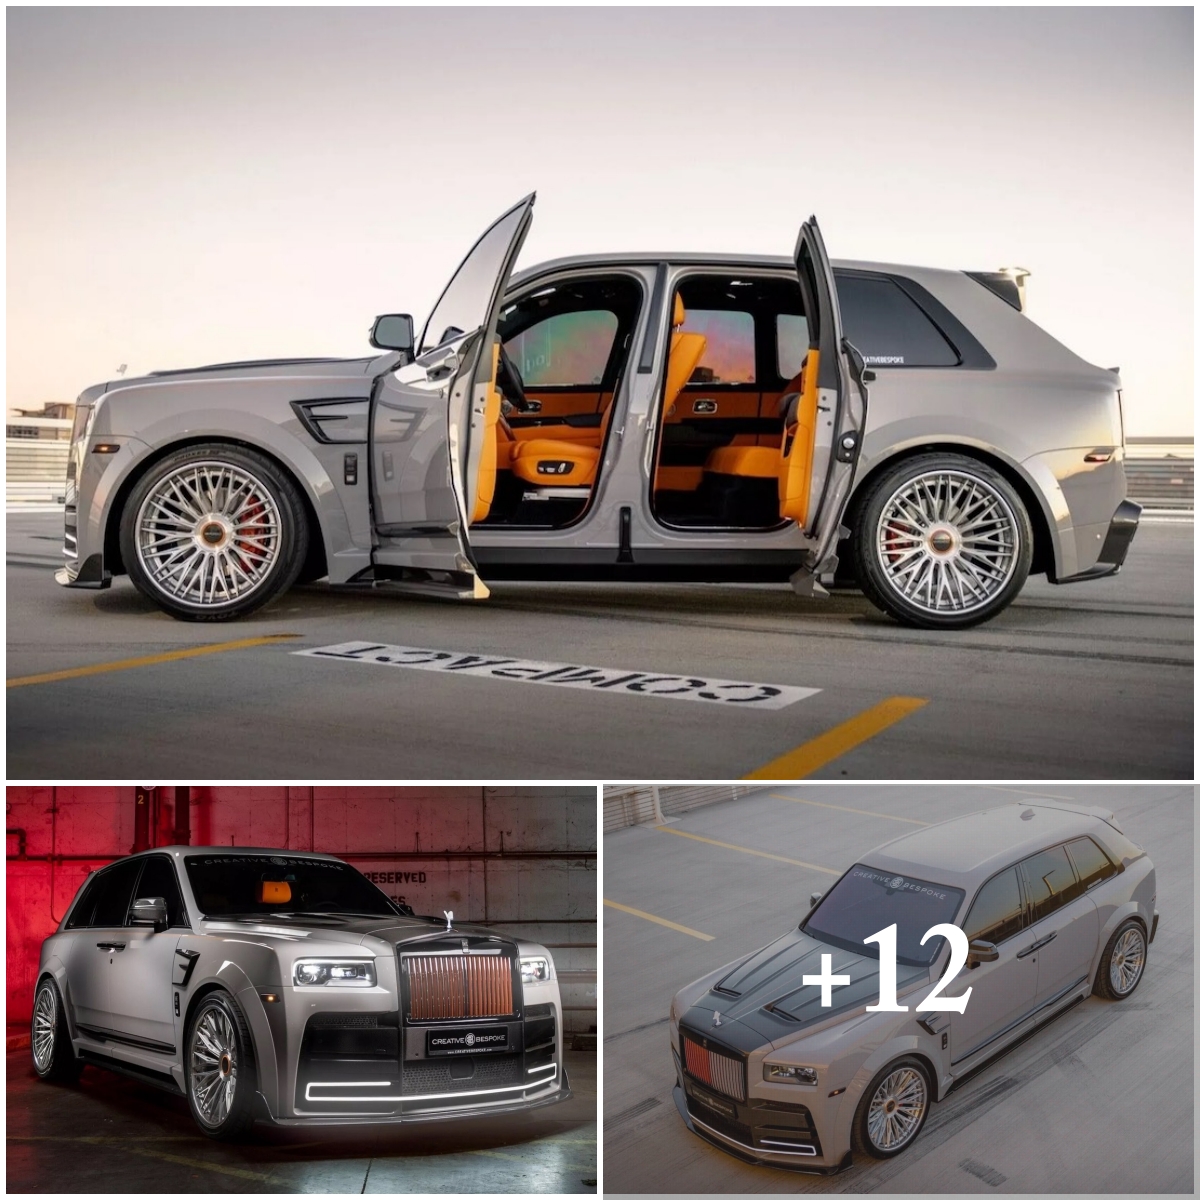 Rolls-Royce Cullinan Gets a “Gangster” Stylish Makeover with Lower Profile than Honda Civic